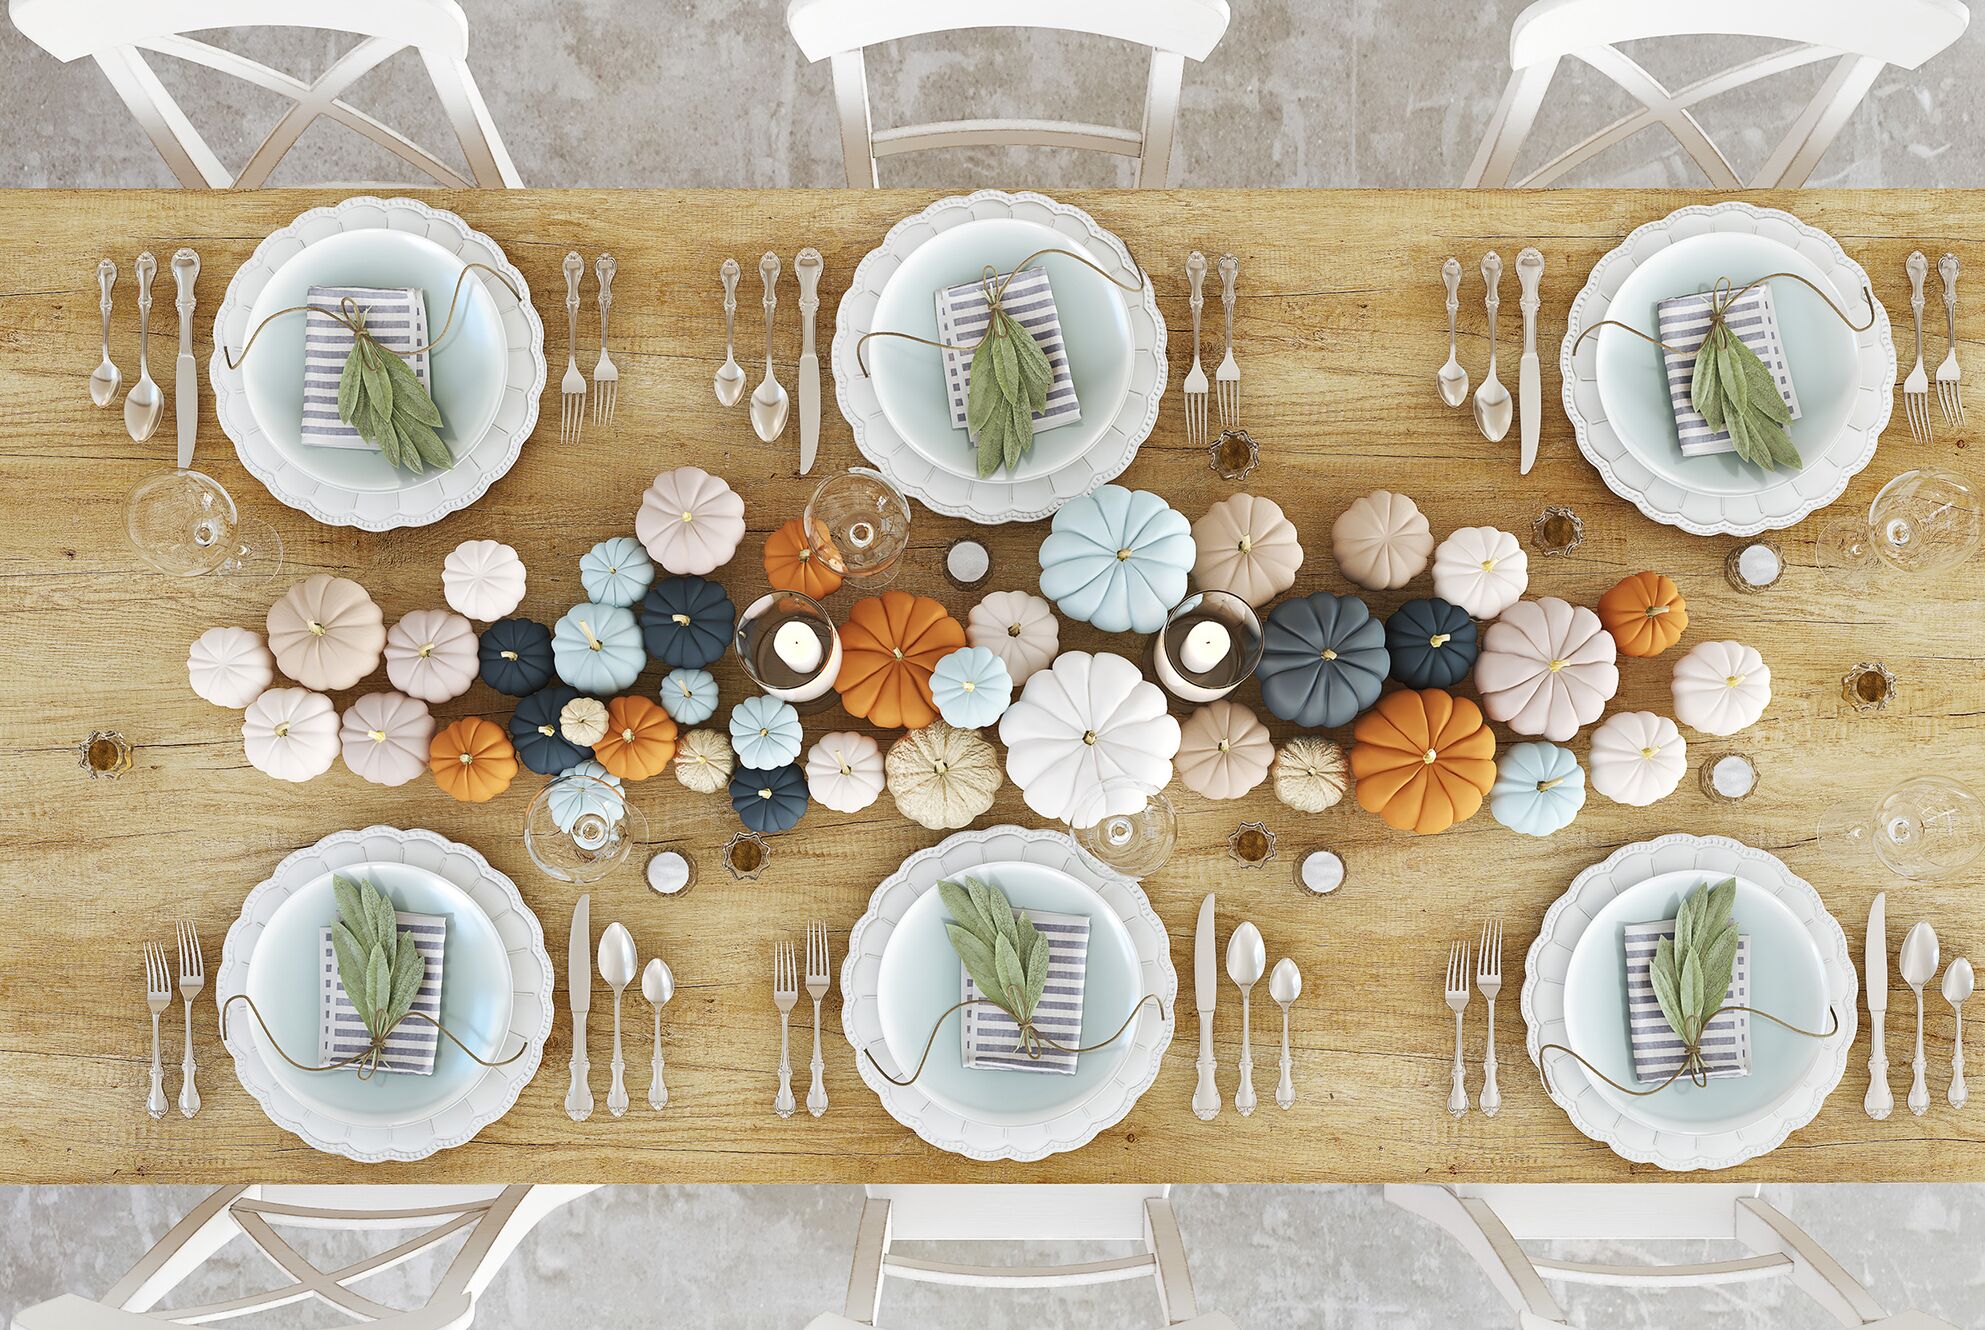 Plate decorations - the most interesting ideas